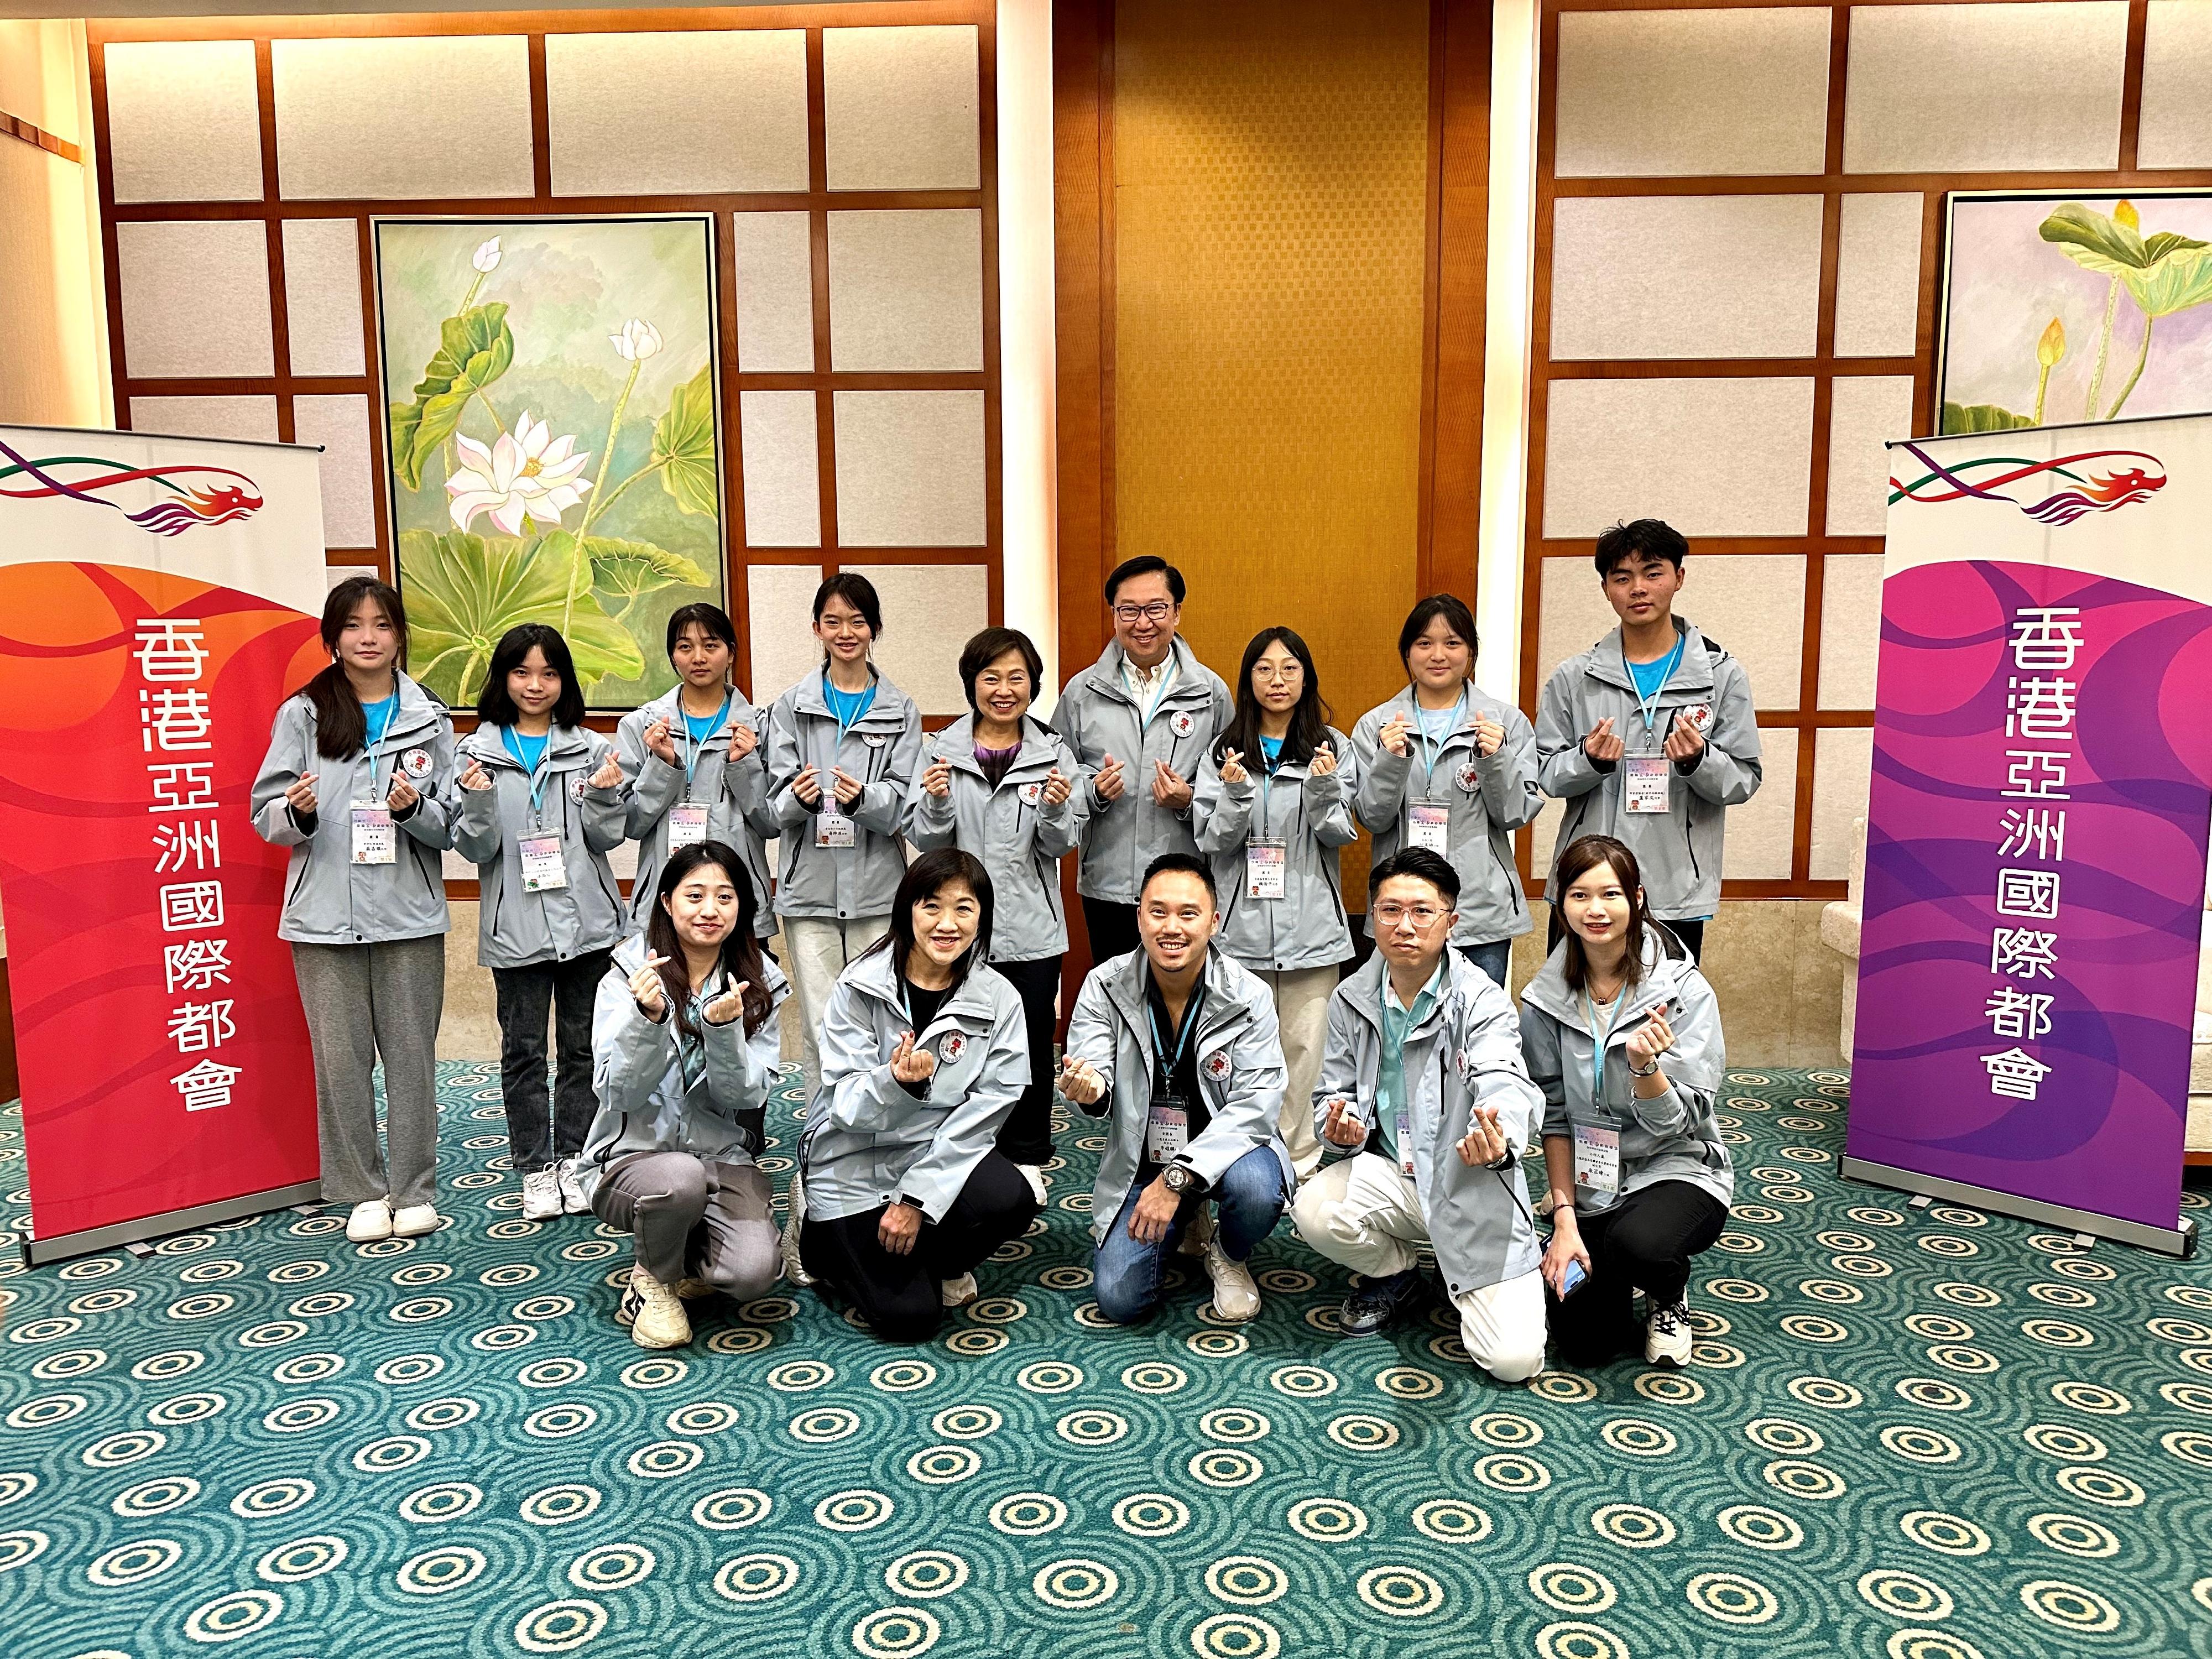 The Secretary for Education, Dr Choi Yuk-lin, today (April 2) attended the closing ceremony of the Yunnan Exchange Tour under the Strive and Rise Programme in Kunming, Yunnan. Photo shows Dr Choi (back row, centre) with representatives of the organisers of the exchange tour and participating students.